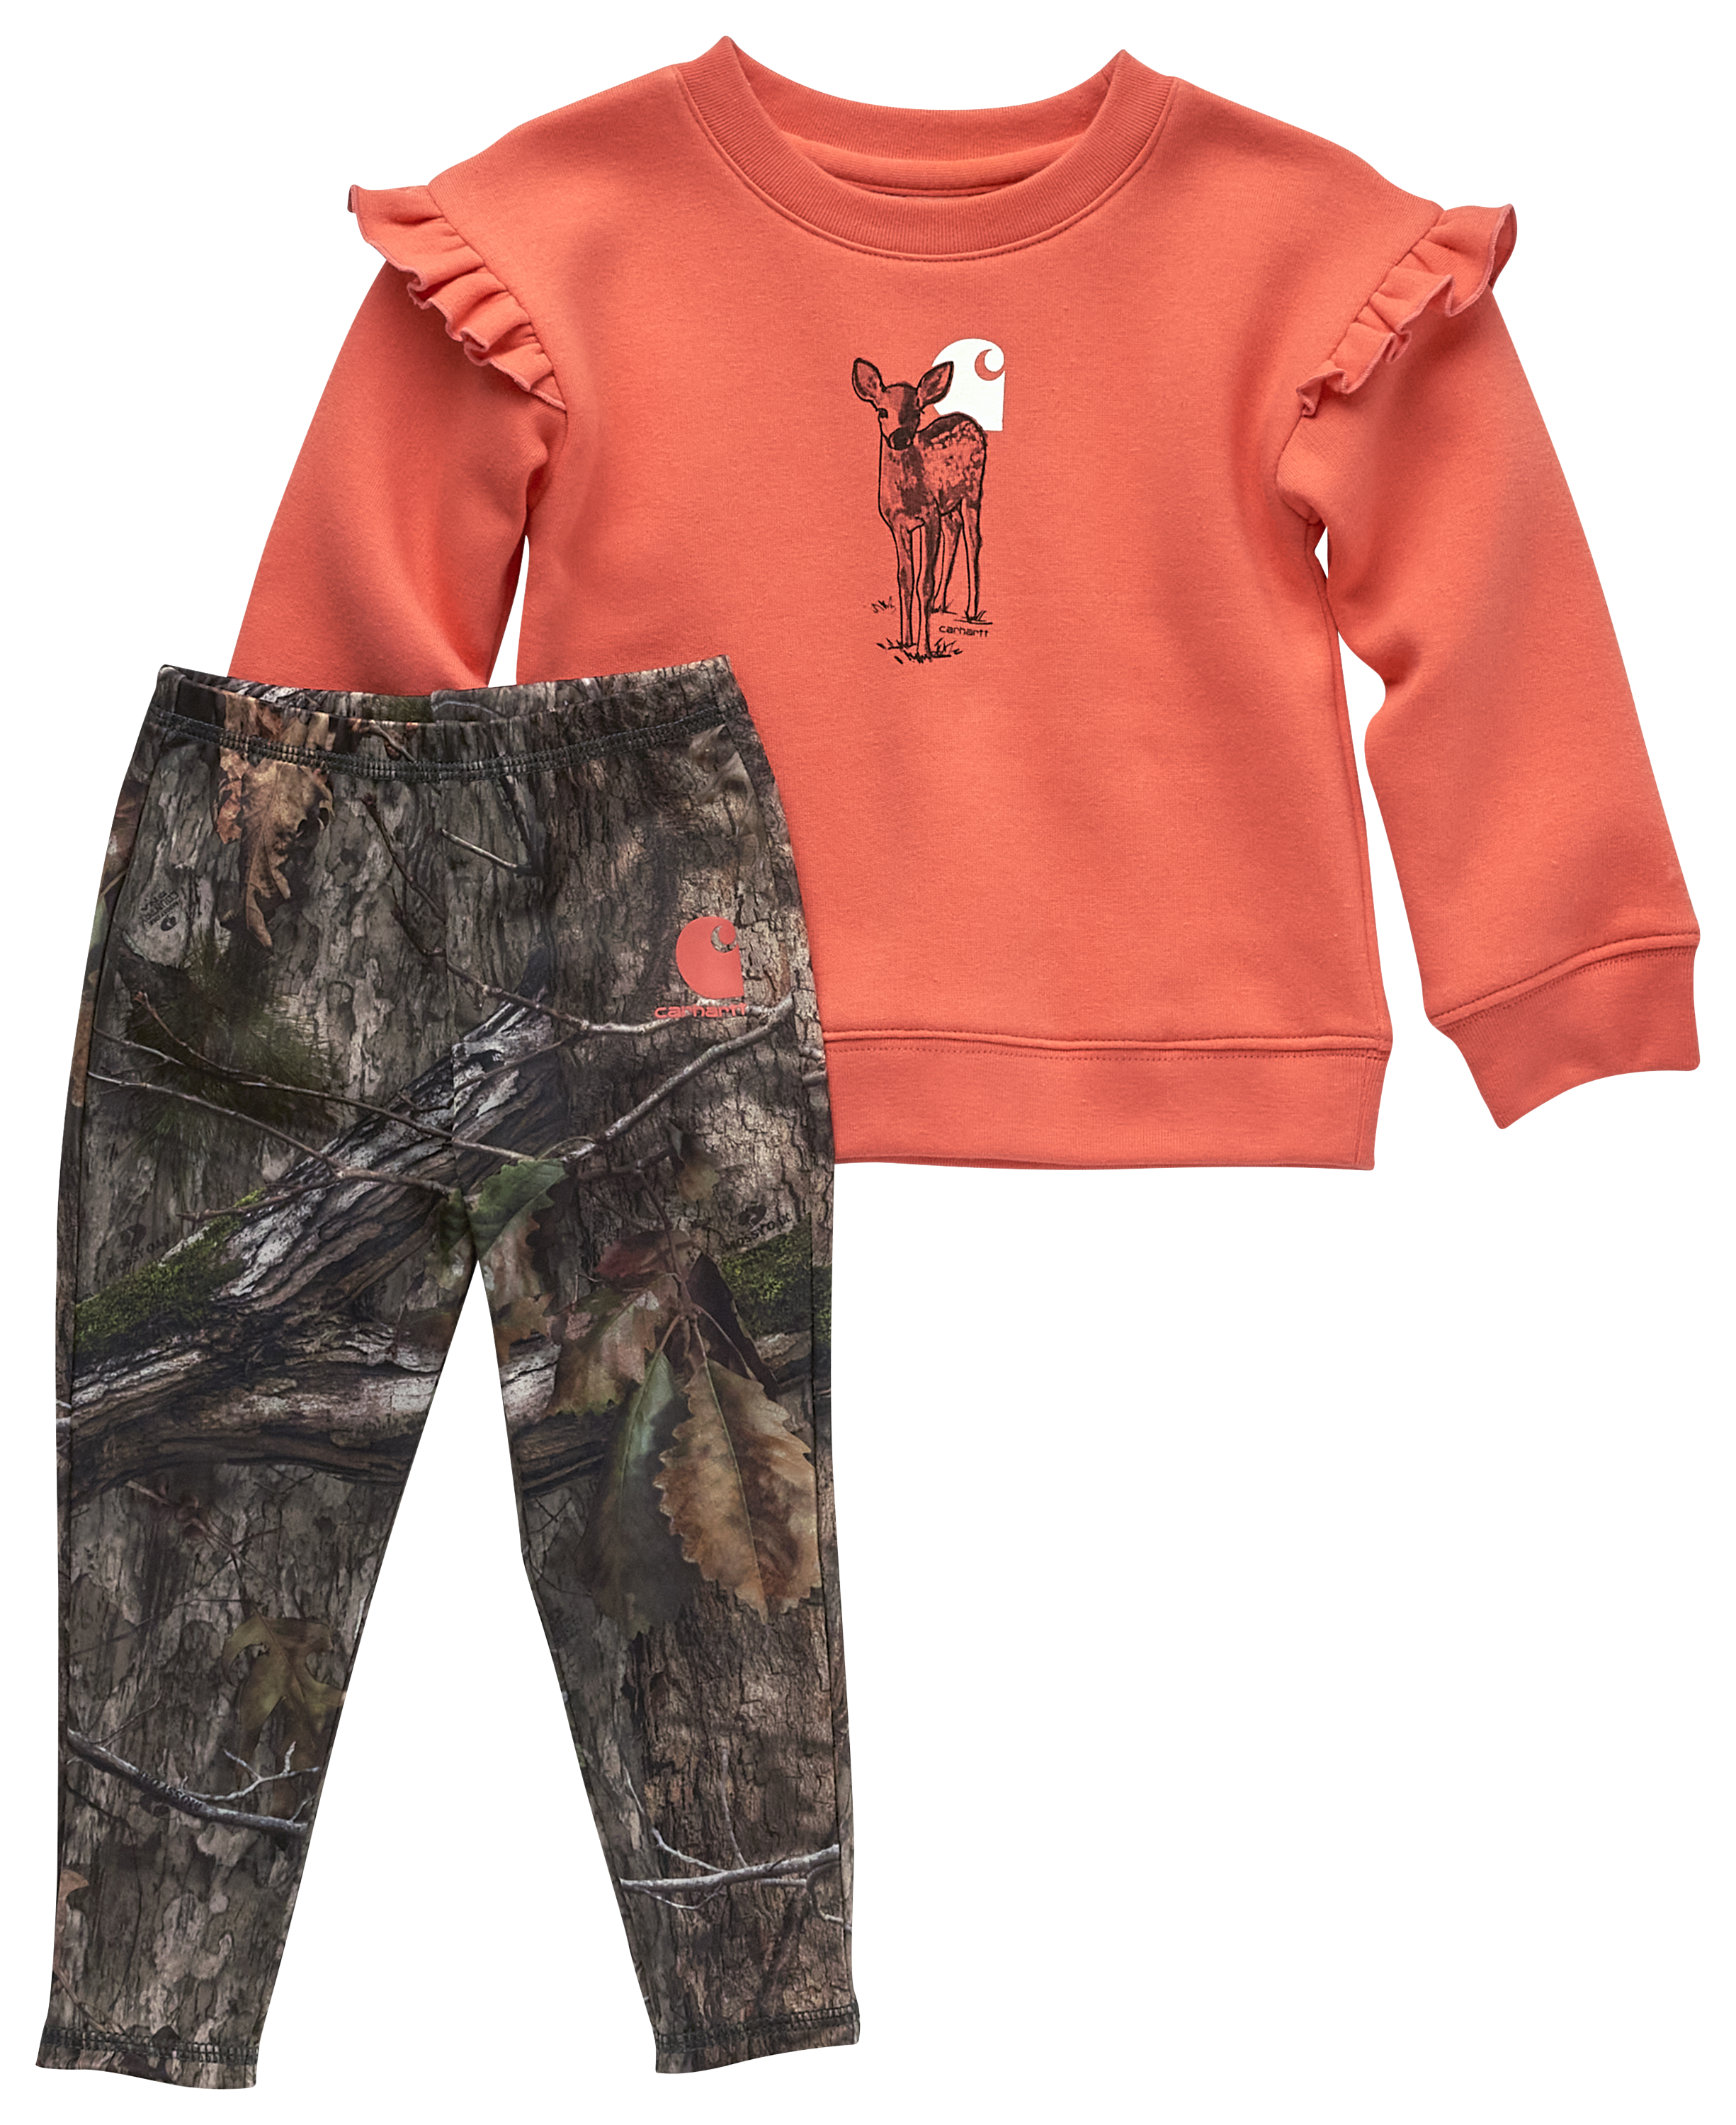 Carhartt Deer Long-Sleeve T-Shirt and Camo Leggings 2-Piece Set for Toddlers - Mossy Oak Country DNA - 2T